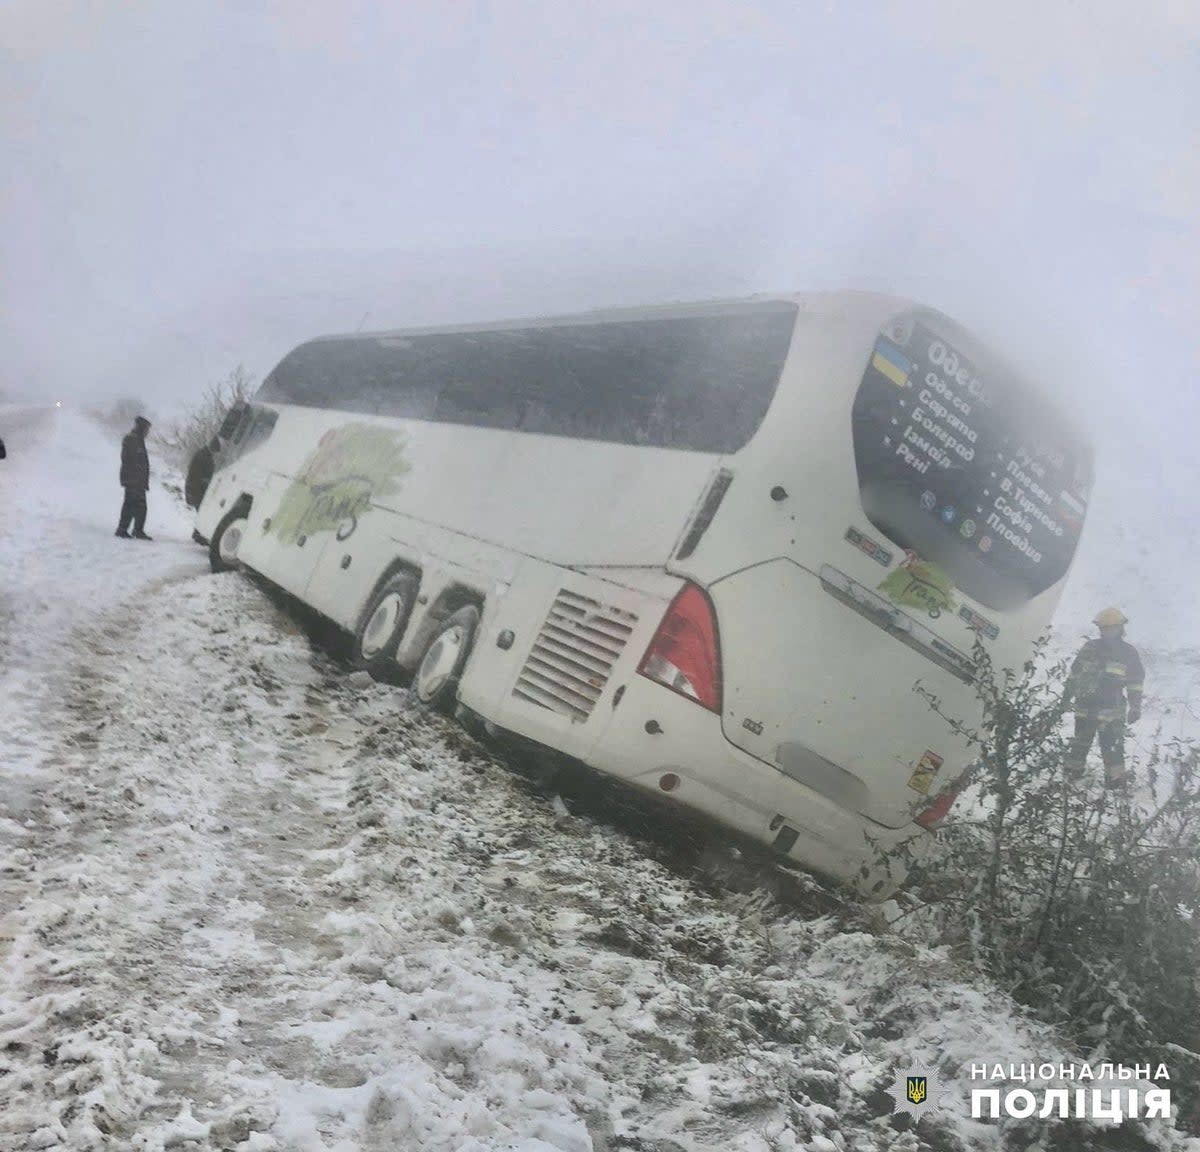 Emergency workers release a passenger bus which is stuck outside a road during a heavy snow storm in Odesa region (via REUTERS)